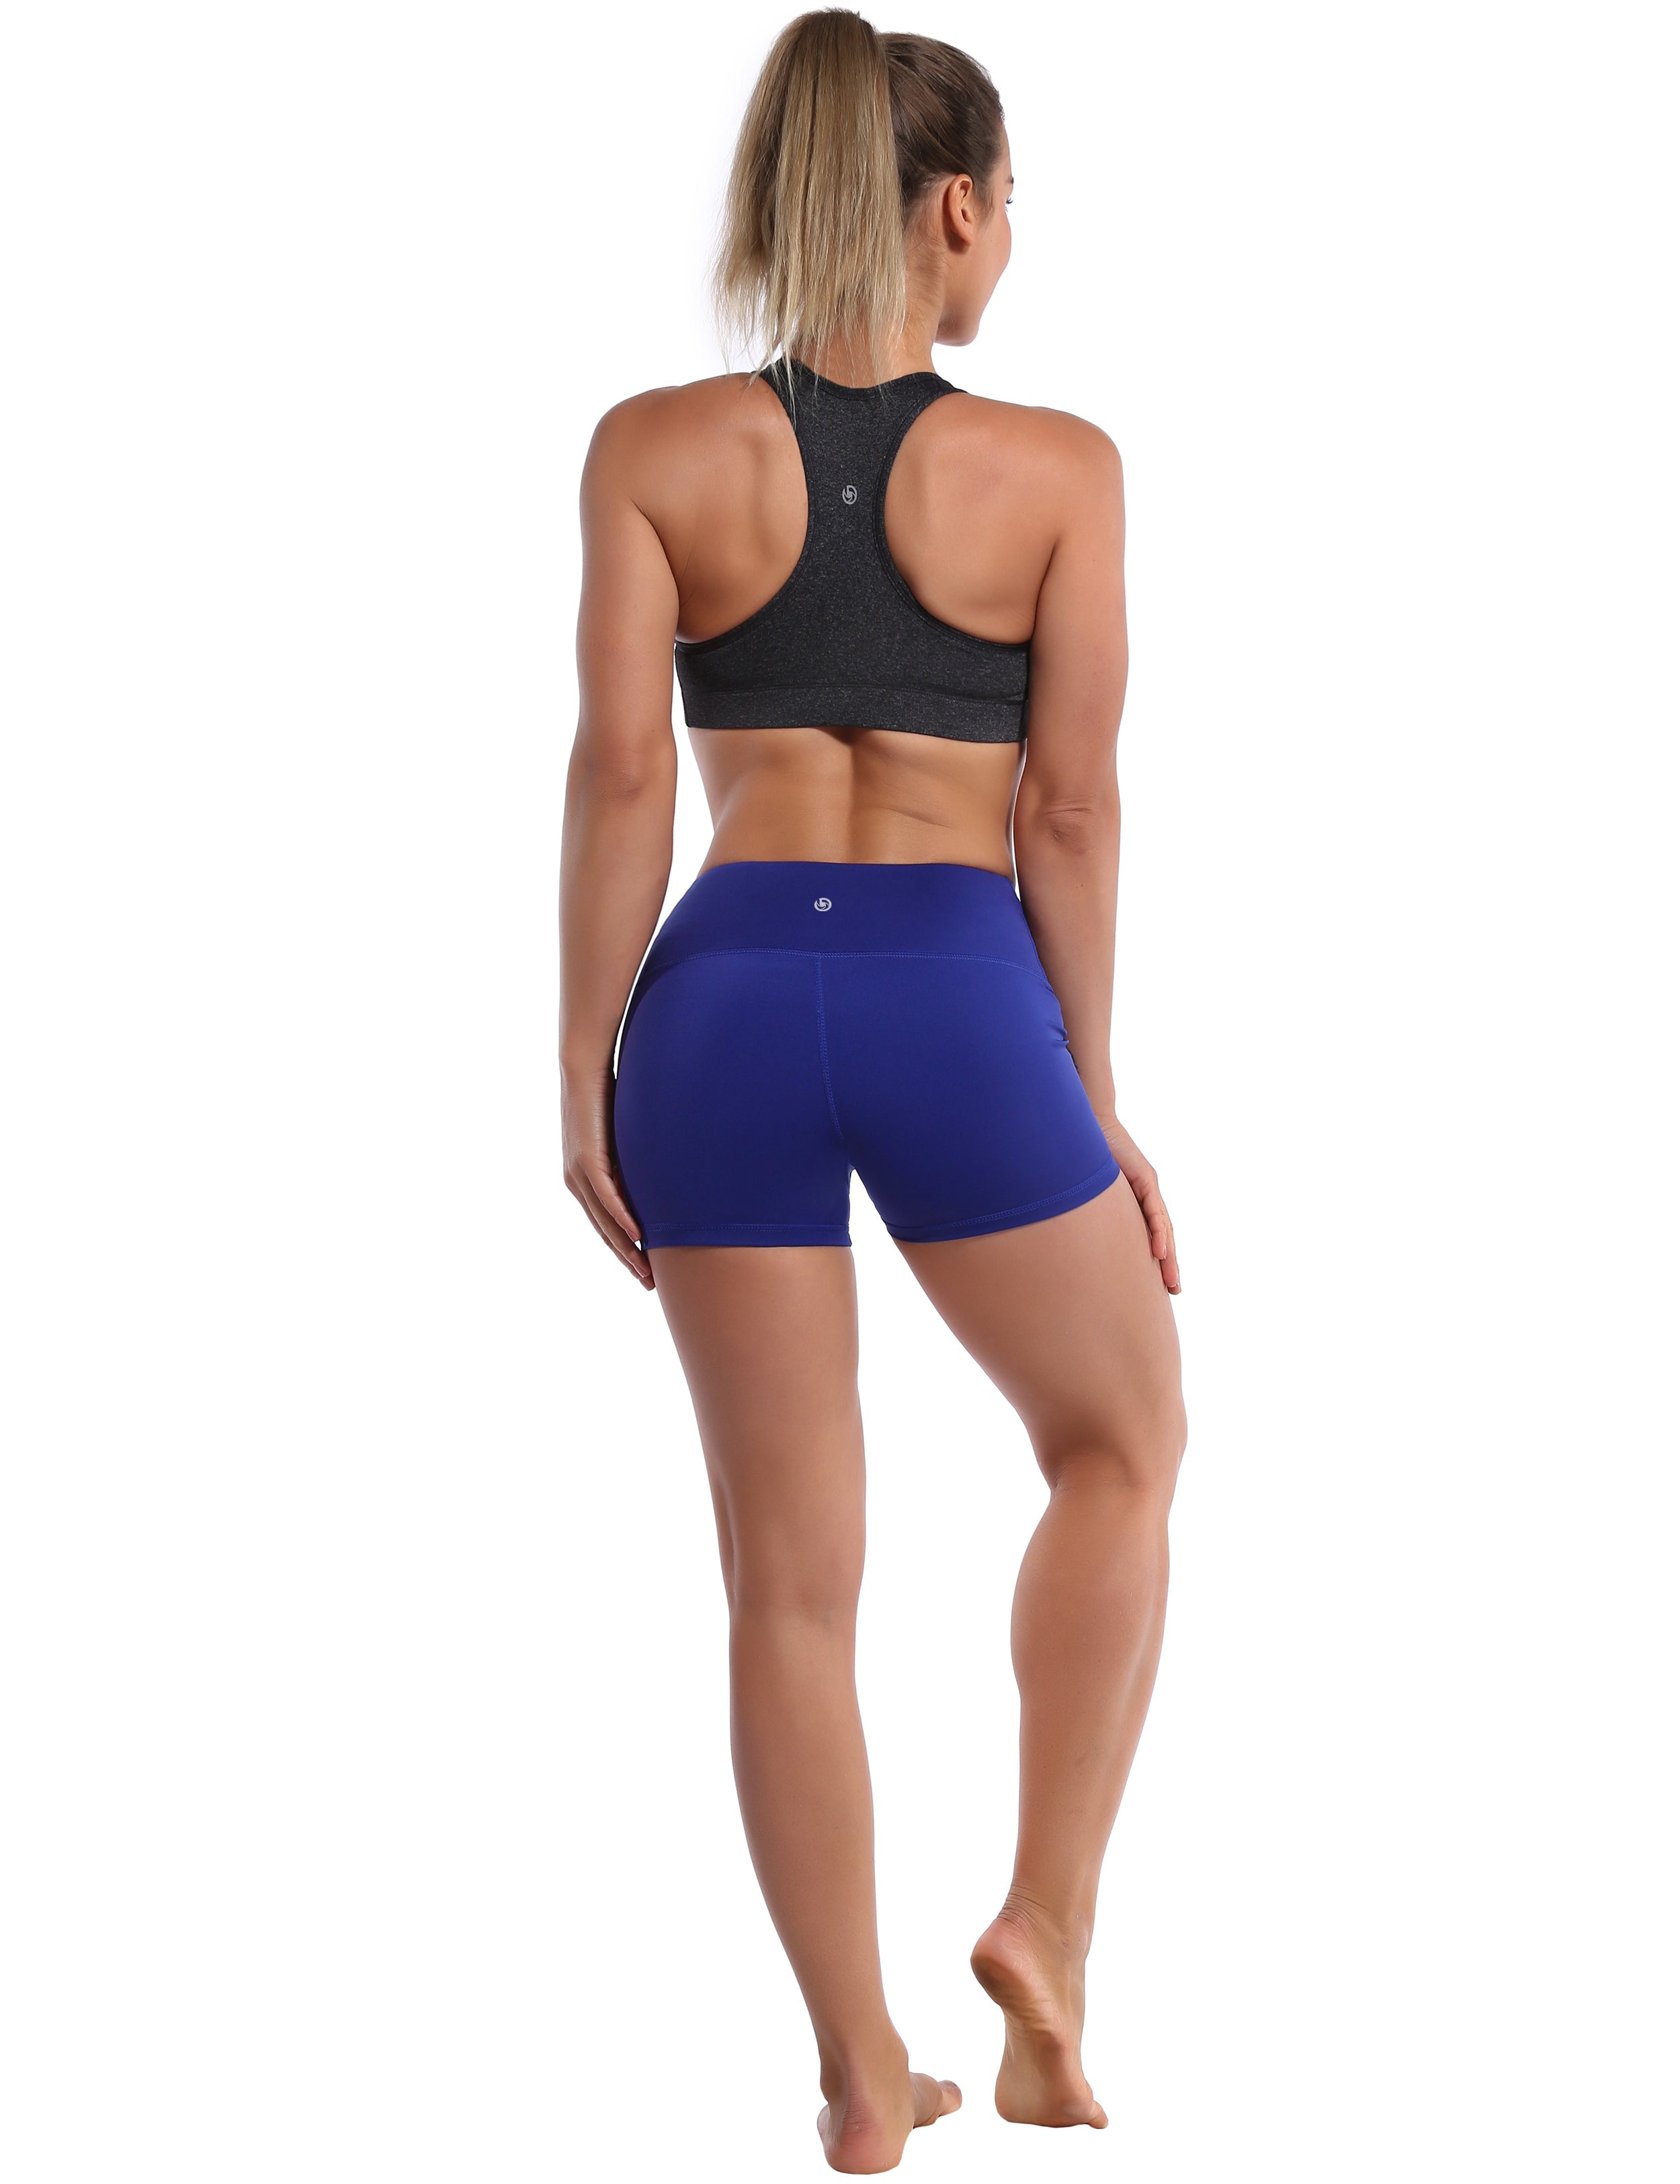 2.5" Yoga Shorts navy Softest-ever fabric High elasticity High density 4-way stretch Fabric doesn't attract lint easily No see-through Moisture-wicking Machine wash 75% Nylon, 25% Spandex